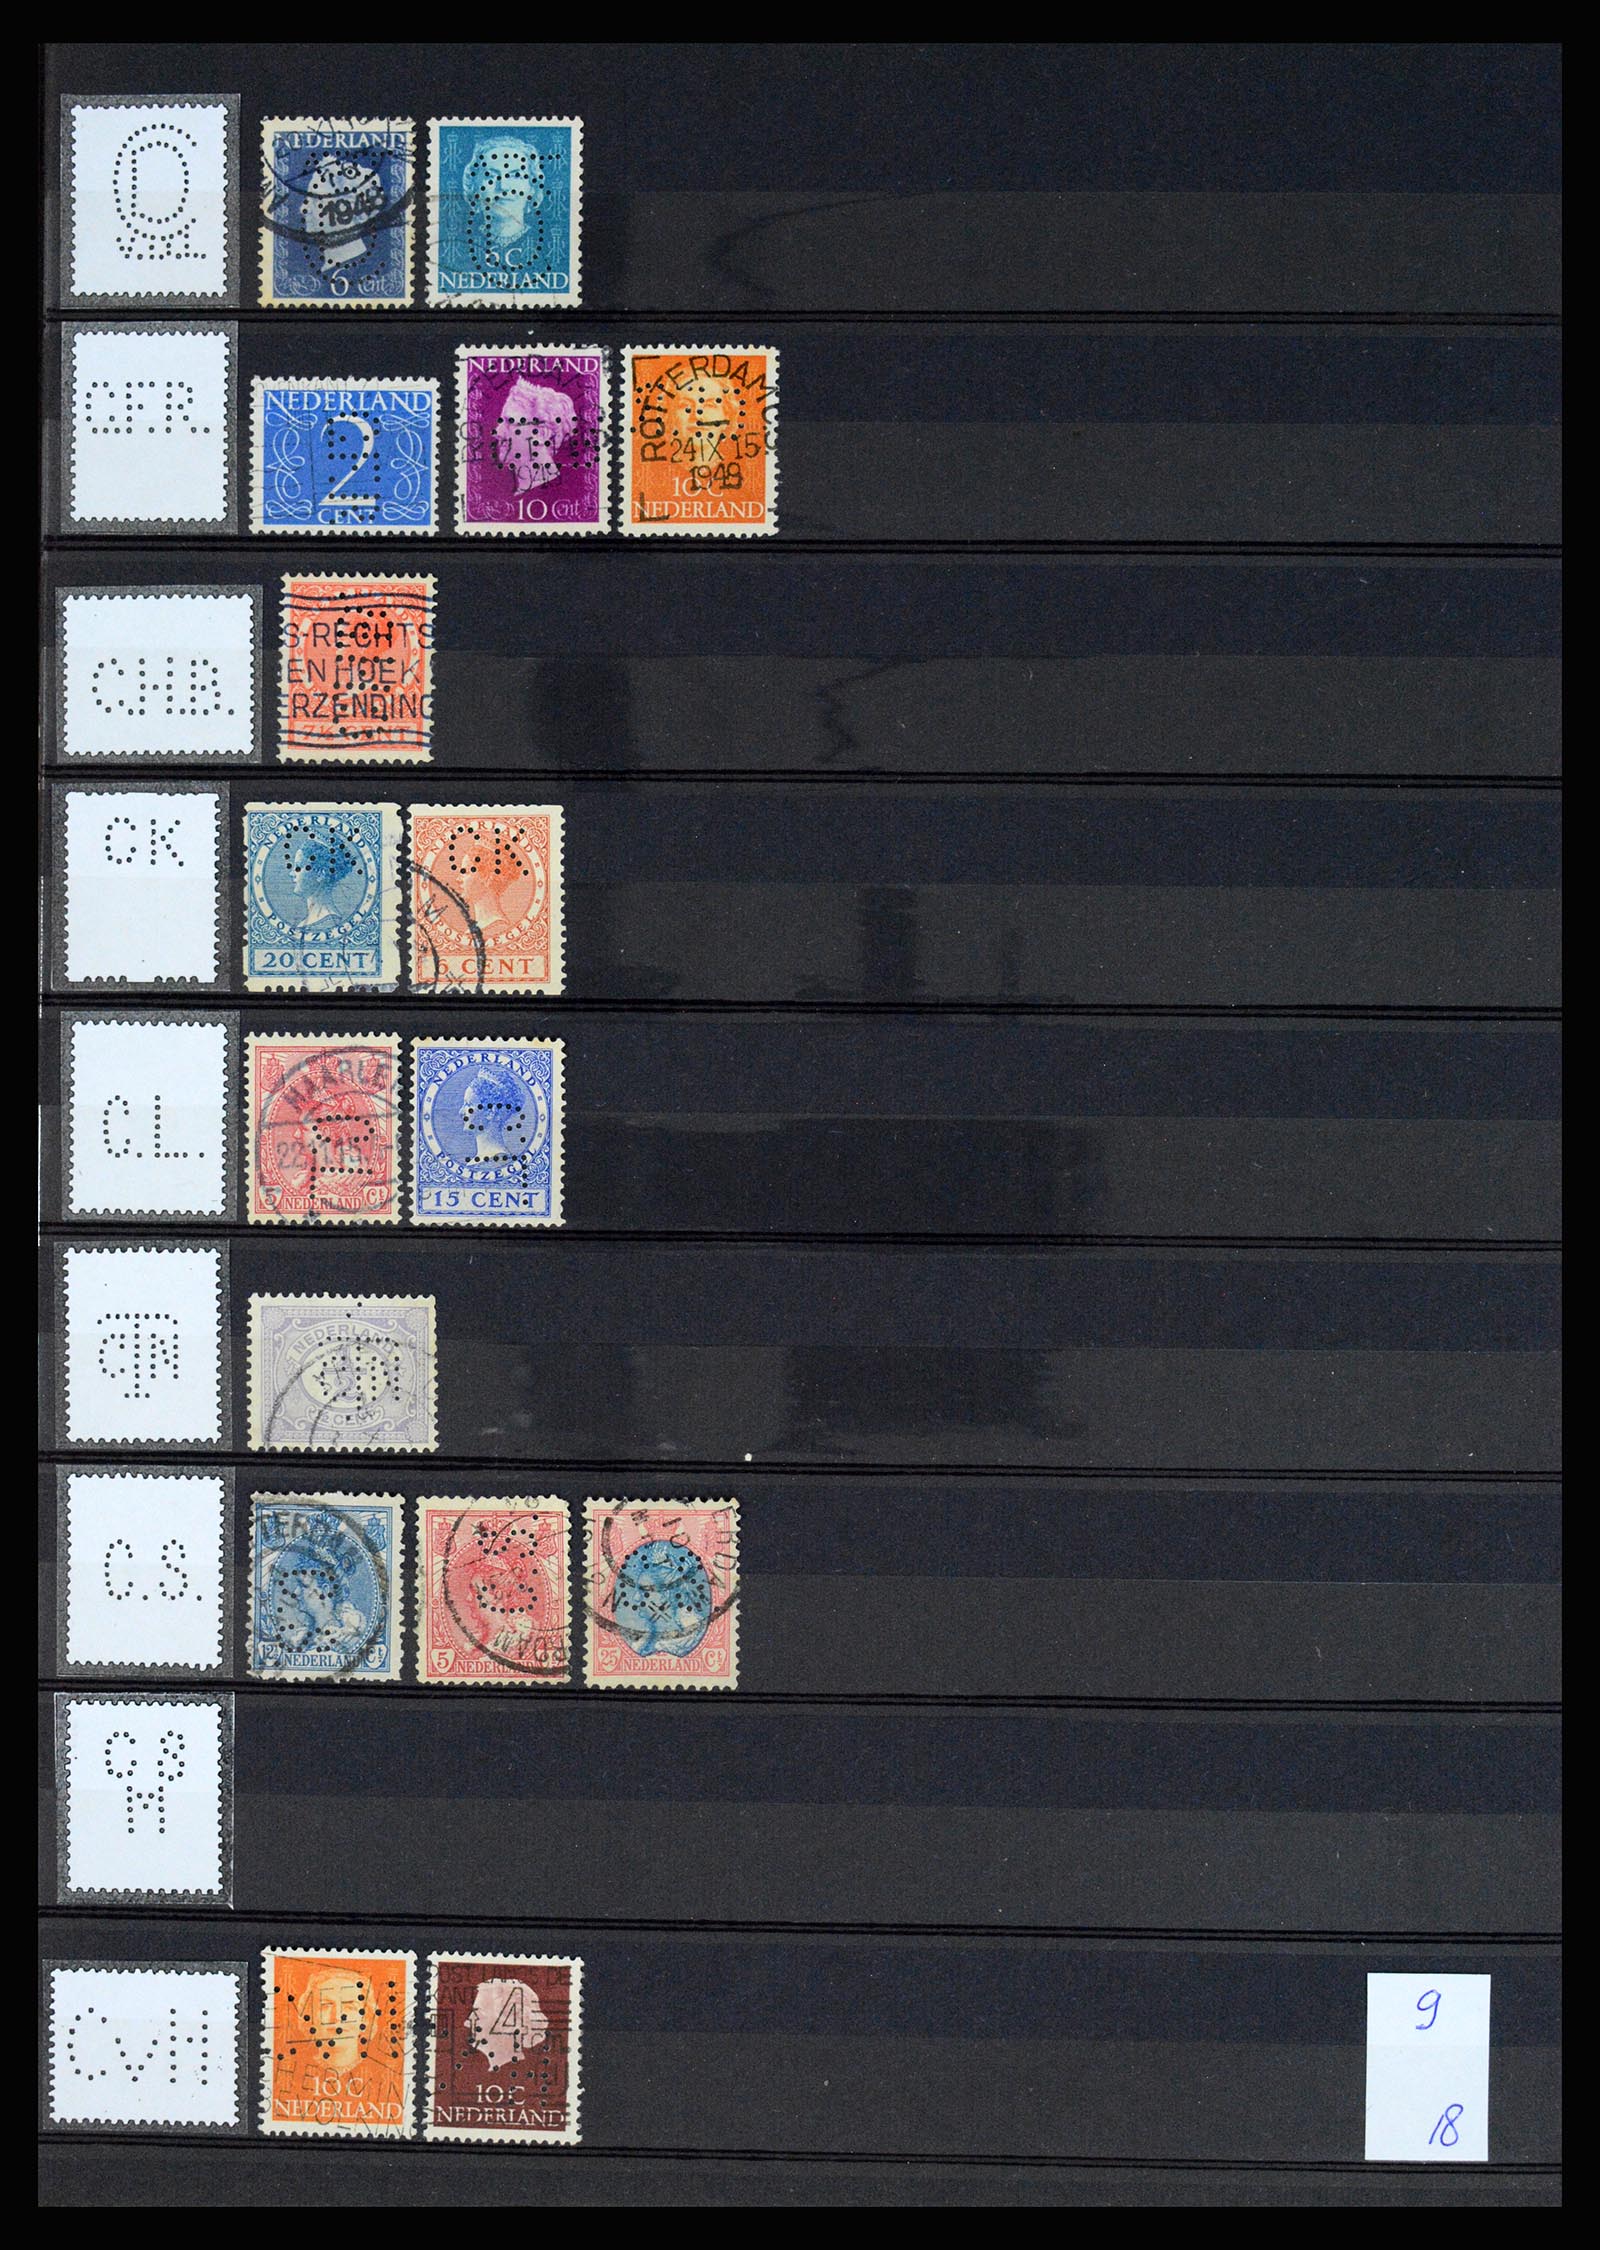 37183 007 - Stamp collection 37183 Netherlands perfins 1872-1960.